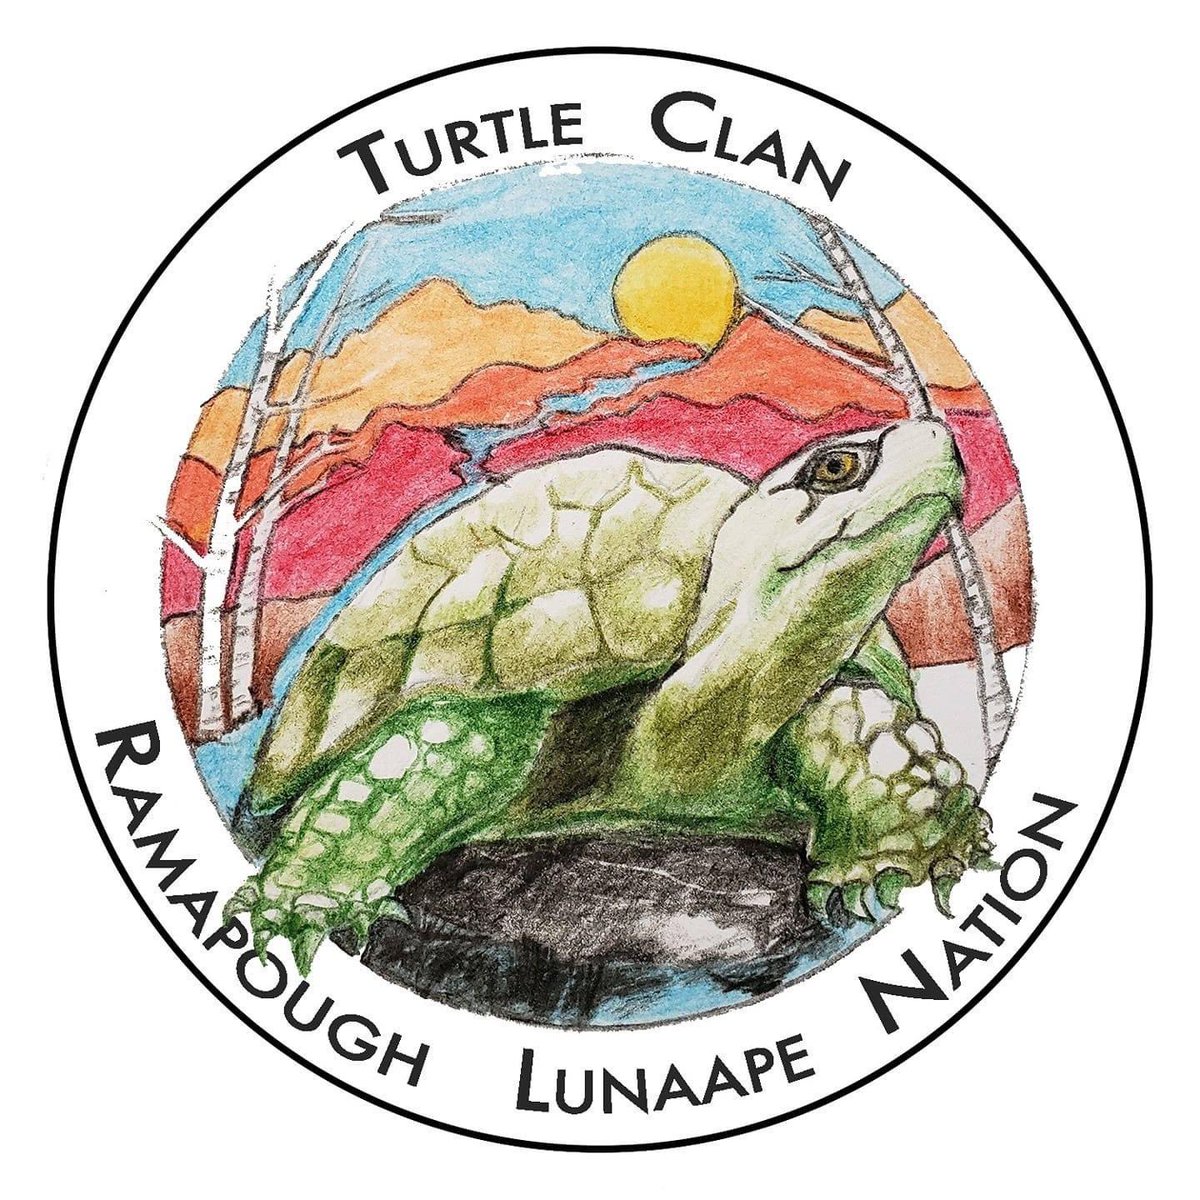 We honor the earth and Turtle Island’s original inhabitants. We live and organize on occupied land of the Ramapough Lunaape Nation and specifically, the Turtle Clan.

We ask that this #IndigenousPeoplesDay you share your solidarity as a donation. 

Donate:
gofundme.com/f/RLsolidarity